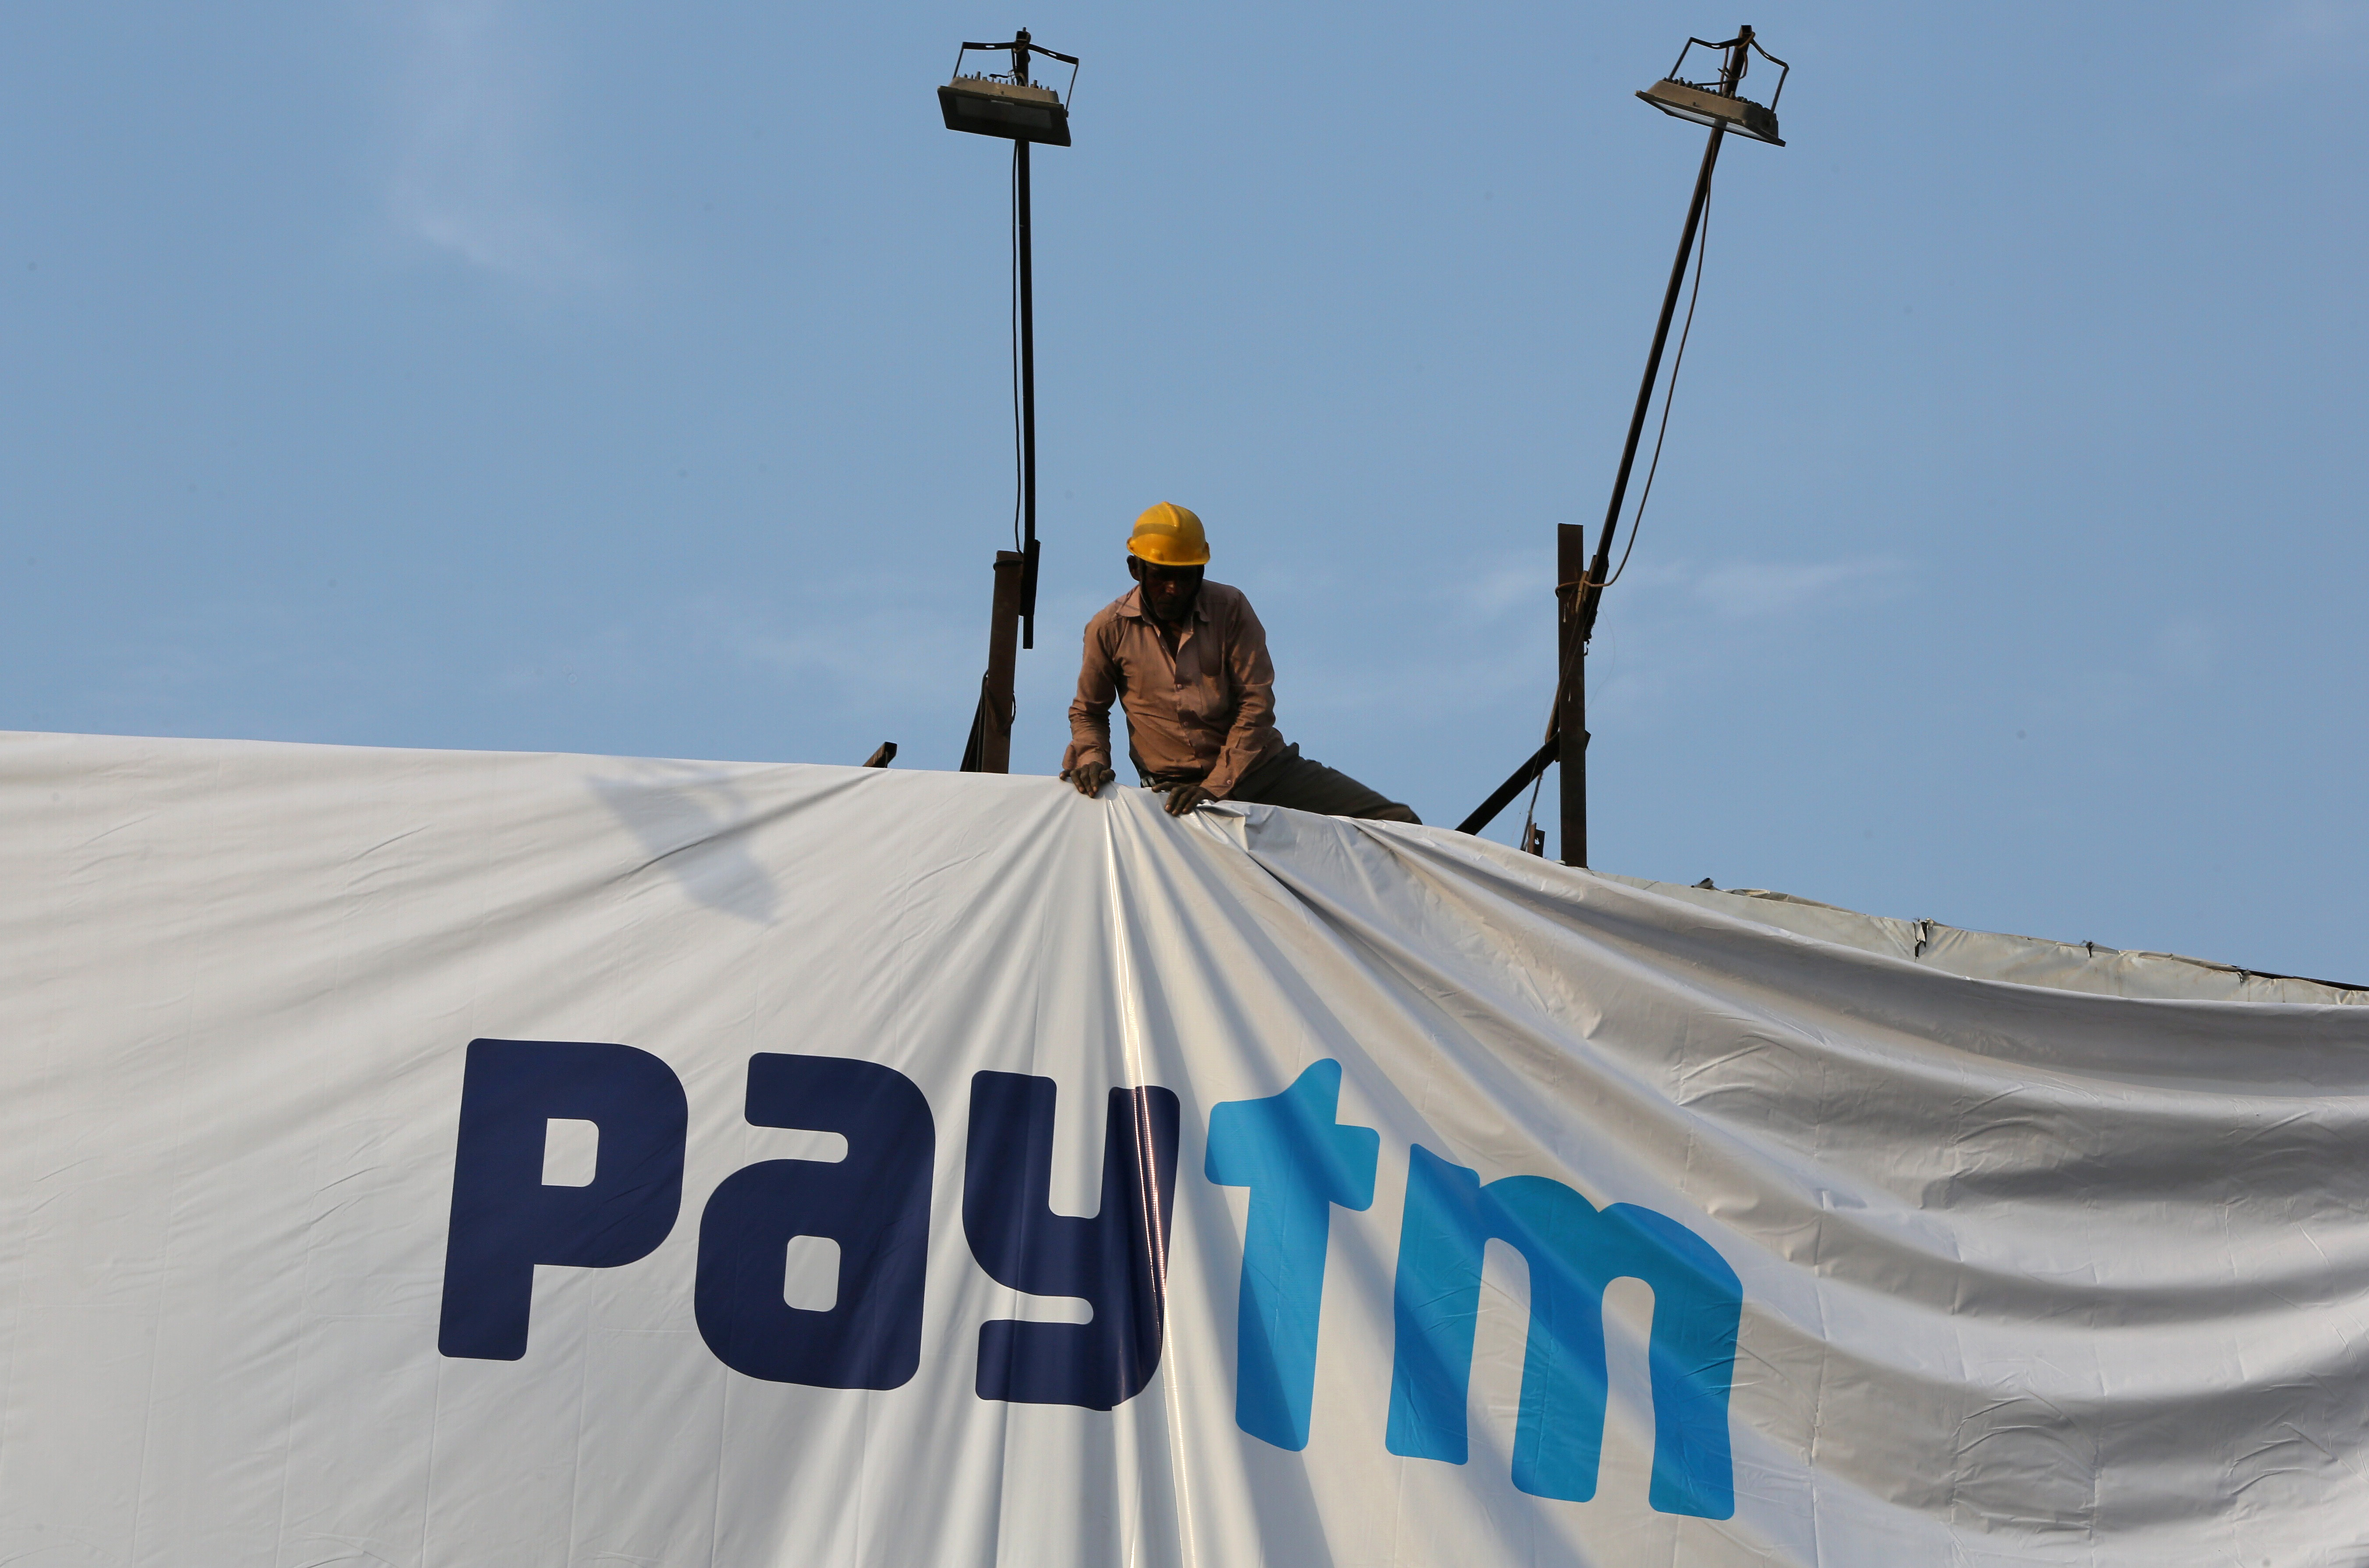 A worker adjusts a hoarding of Paytm, a digital payments firm, in Ahmedabad